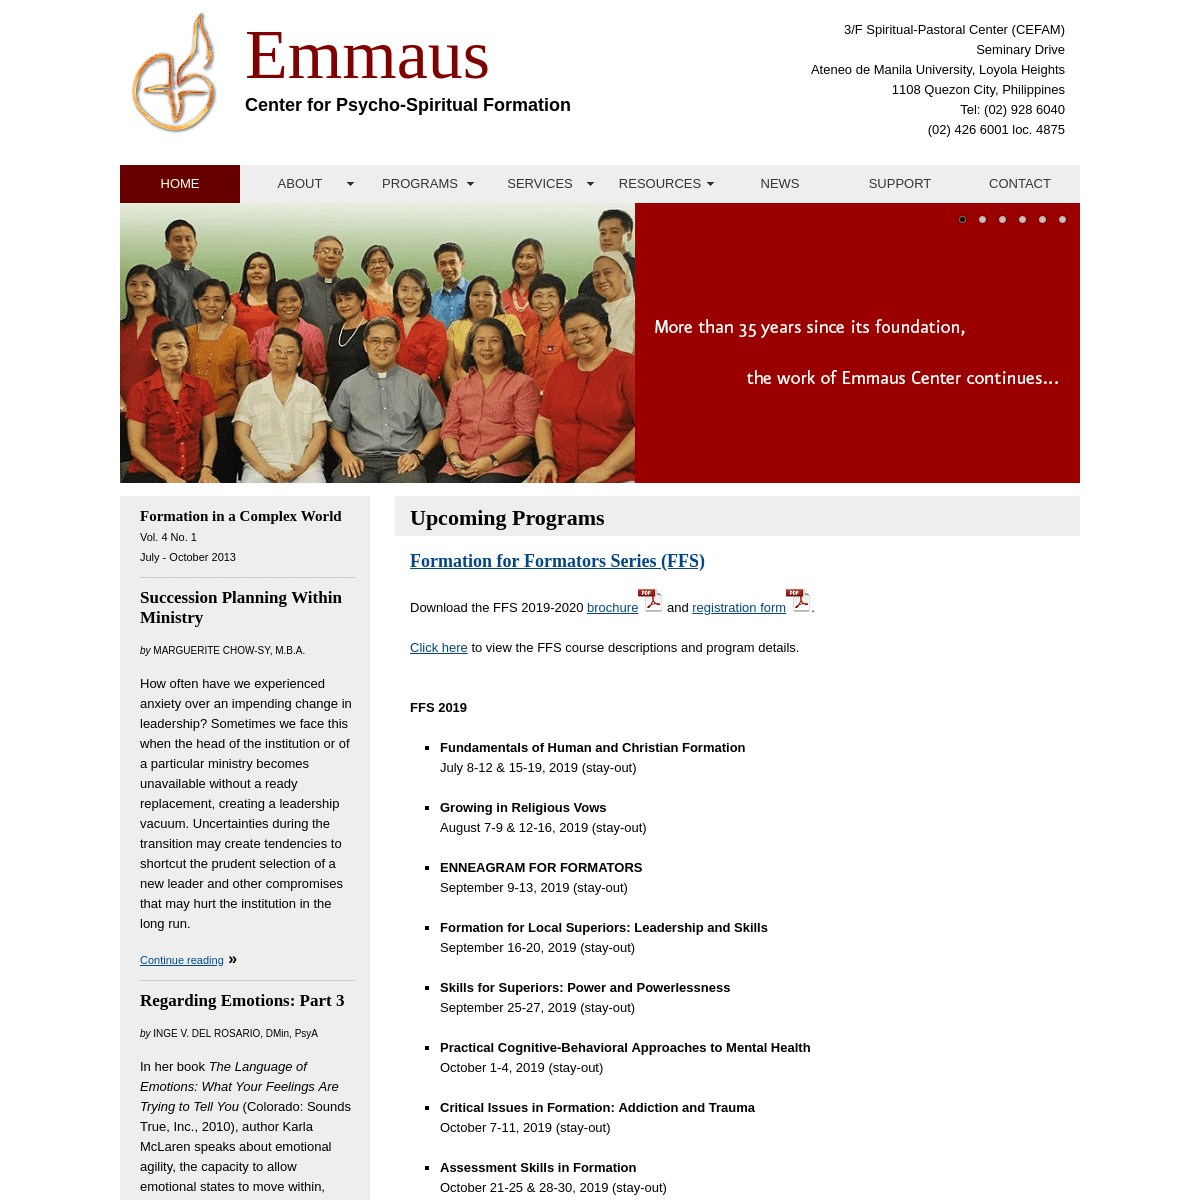 EMMAUS Center for Psycho-Spiritual Formation (Philippines)